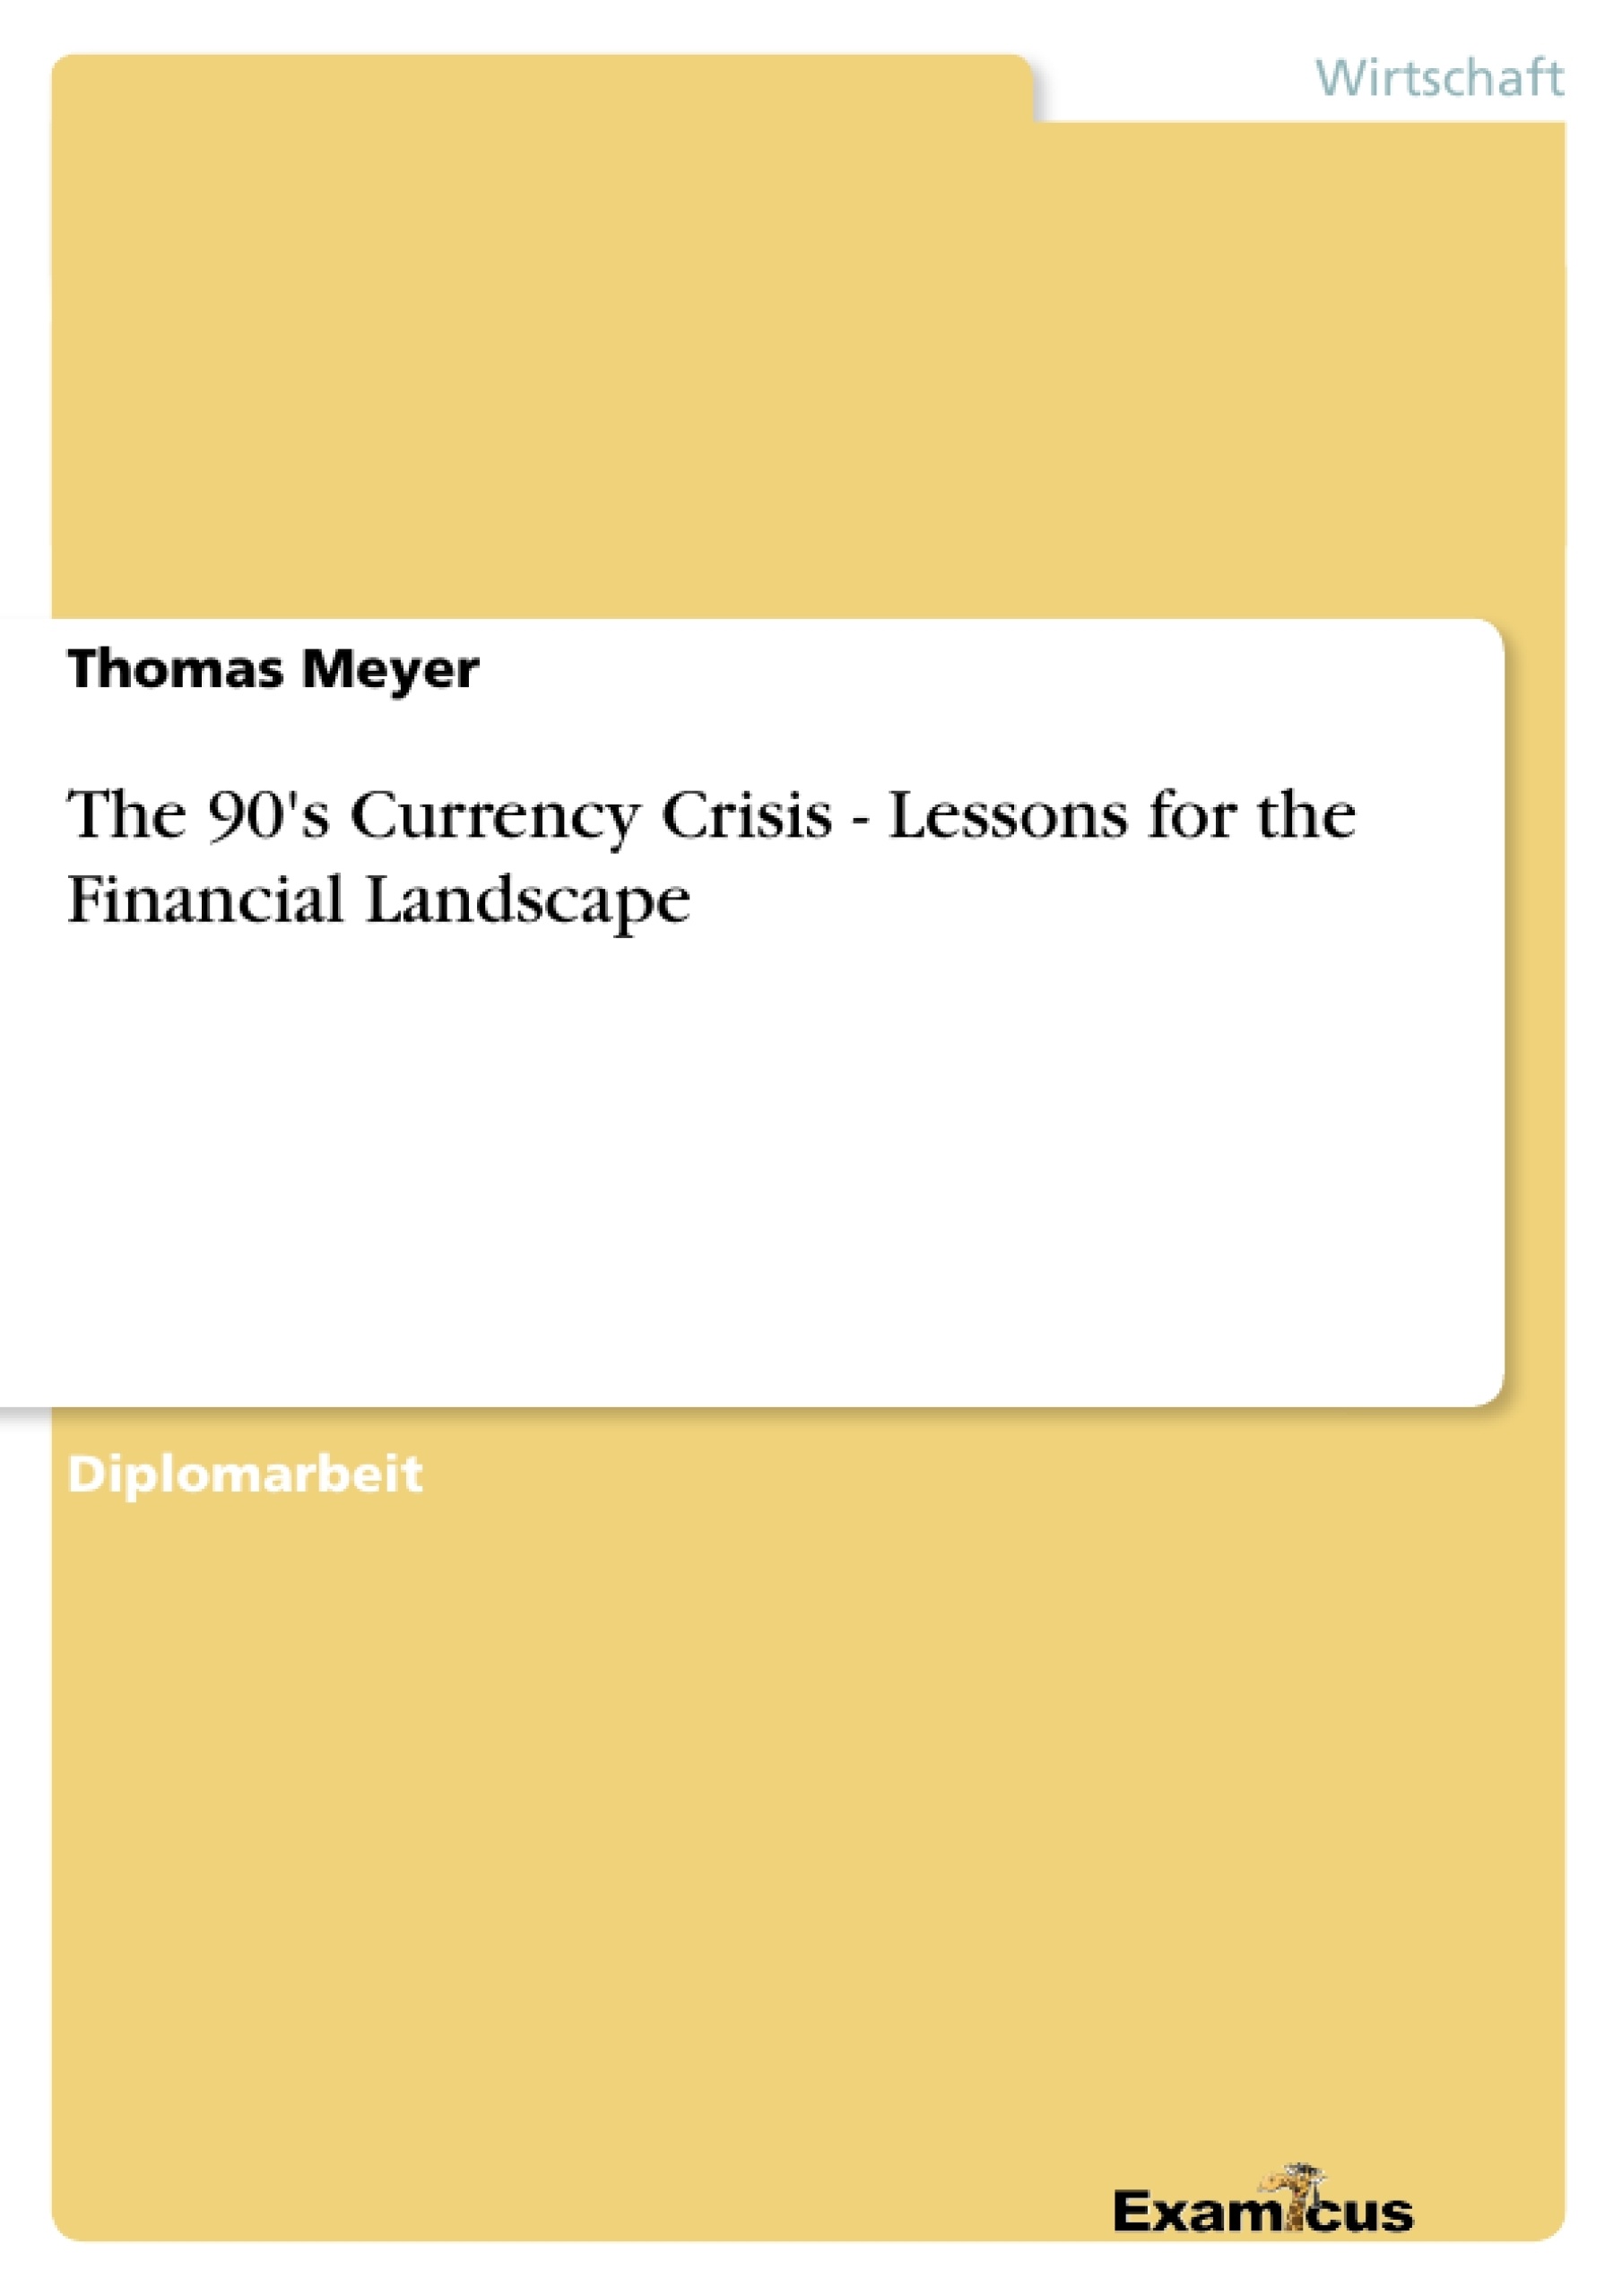 Titel: The 90's Currency Crisis - Lessons for the Financial Landscape